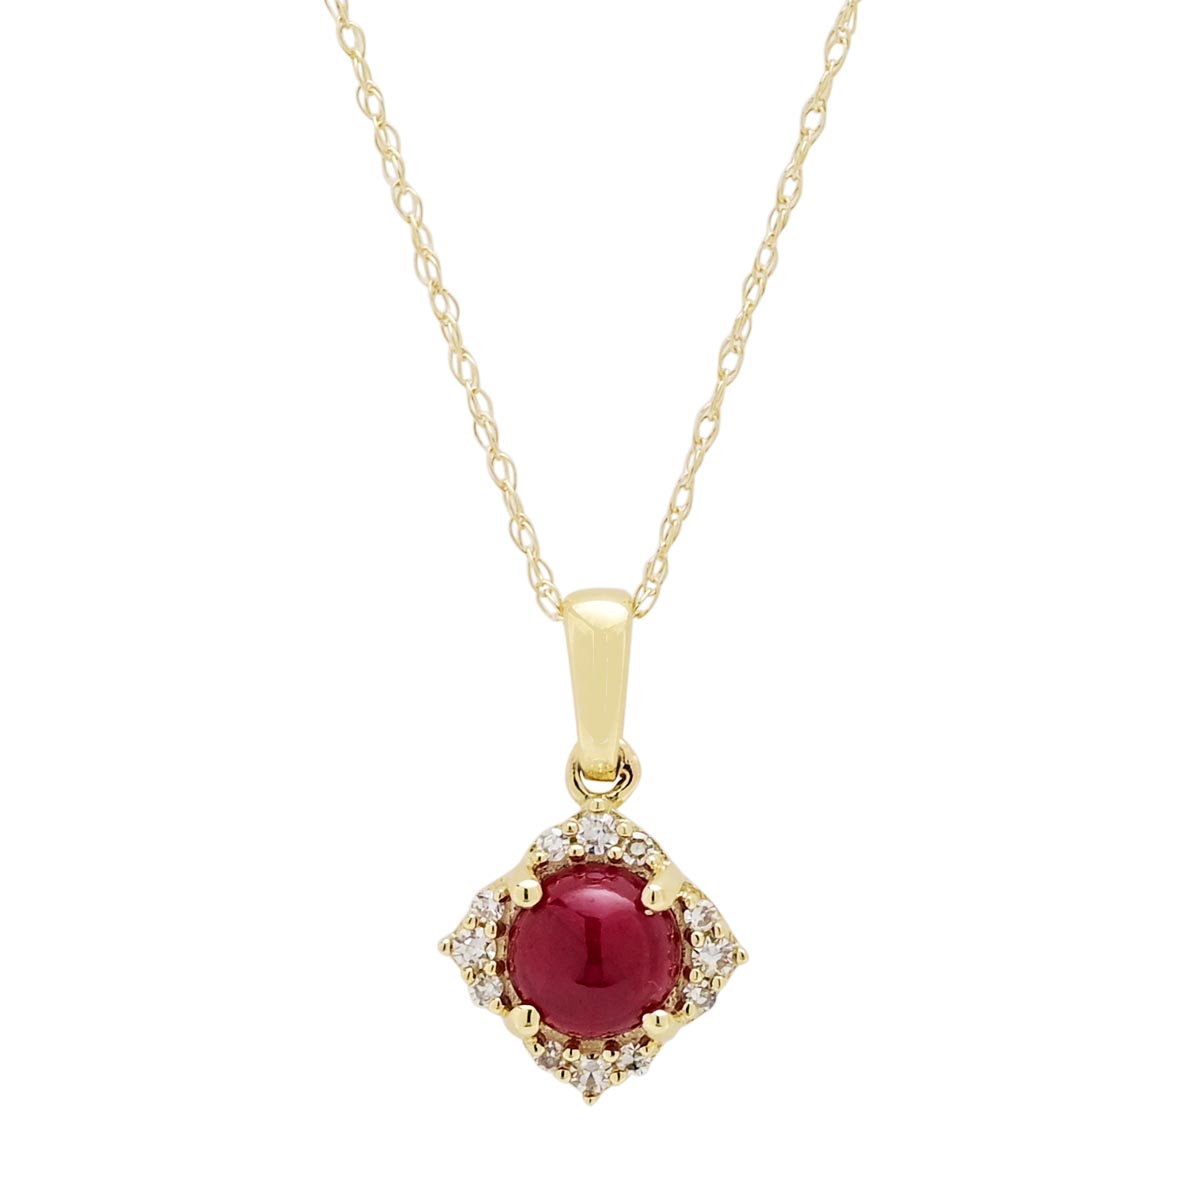 Greenland Ruby Necklace in 10kt Yellow Gold with Diamonds (1/20ct tw)